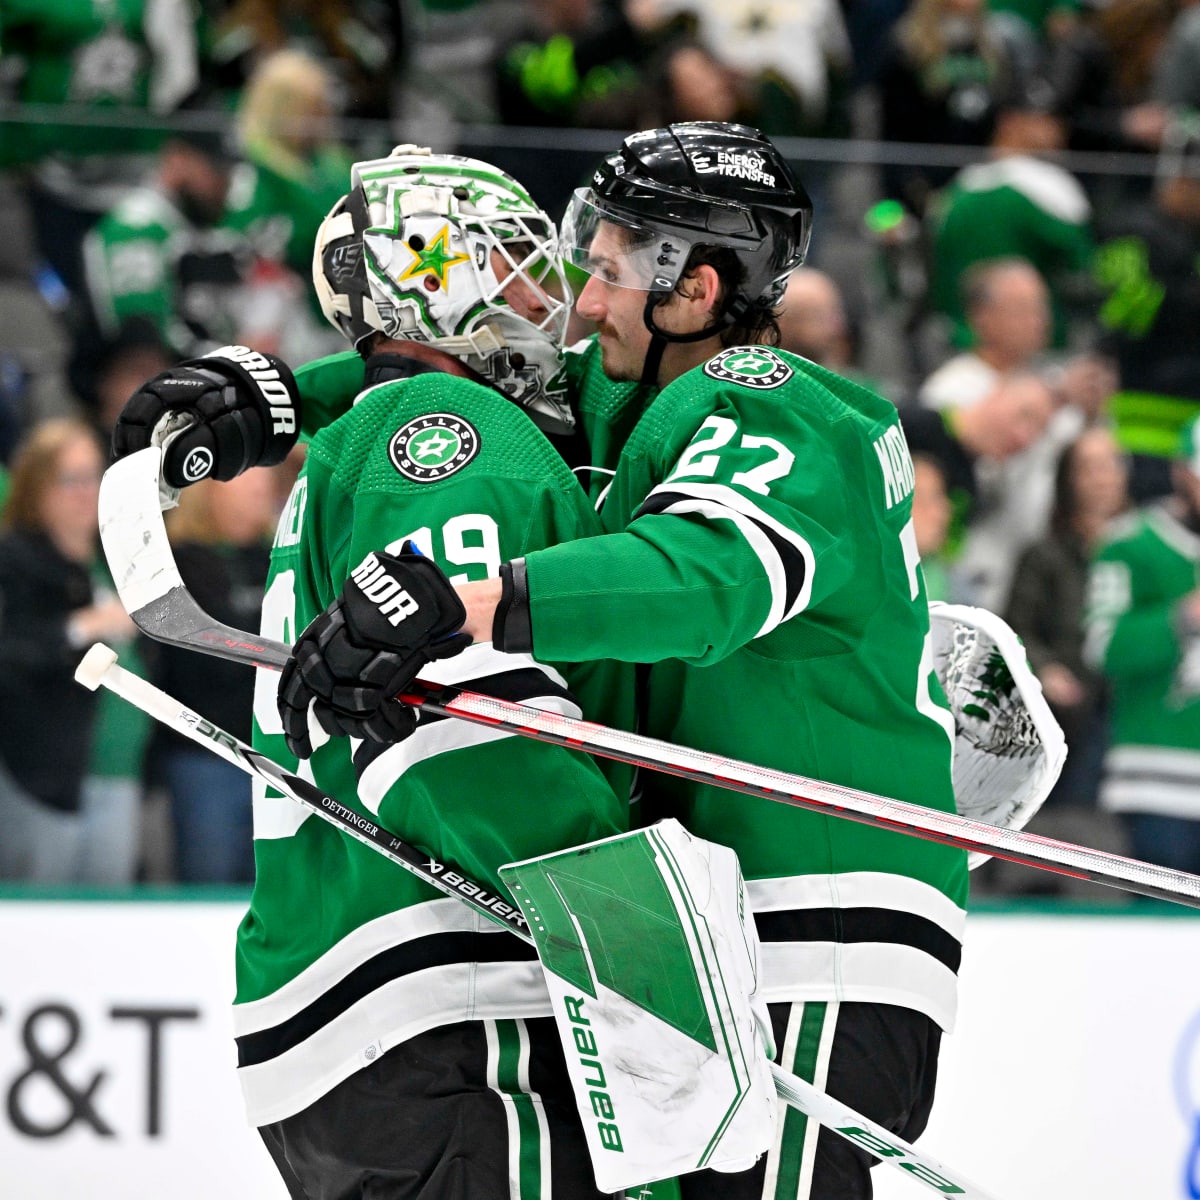 Dallas Stars to emerge stronger after Stanley Cup playoffs